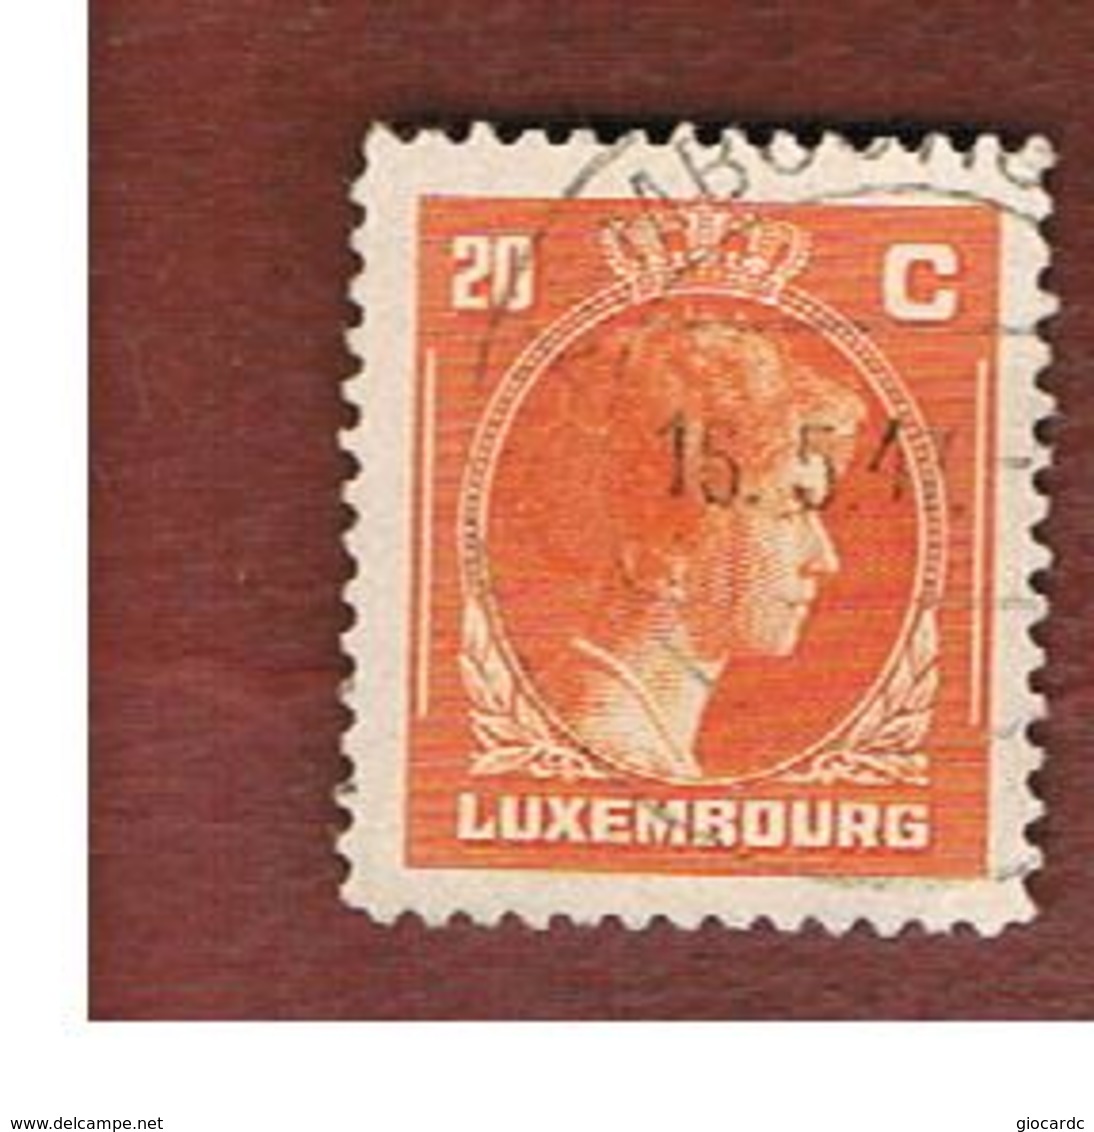 LUSSEMBURGO (LUXEMBOURG)   -   SG  440    -   1946 GRAND DUCHESS  CHARLOTTE 20  -   USED - 1944 Charlotte Right-hand Side